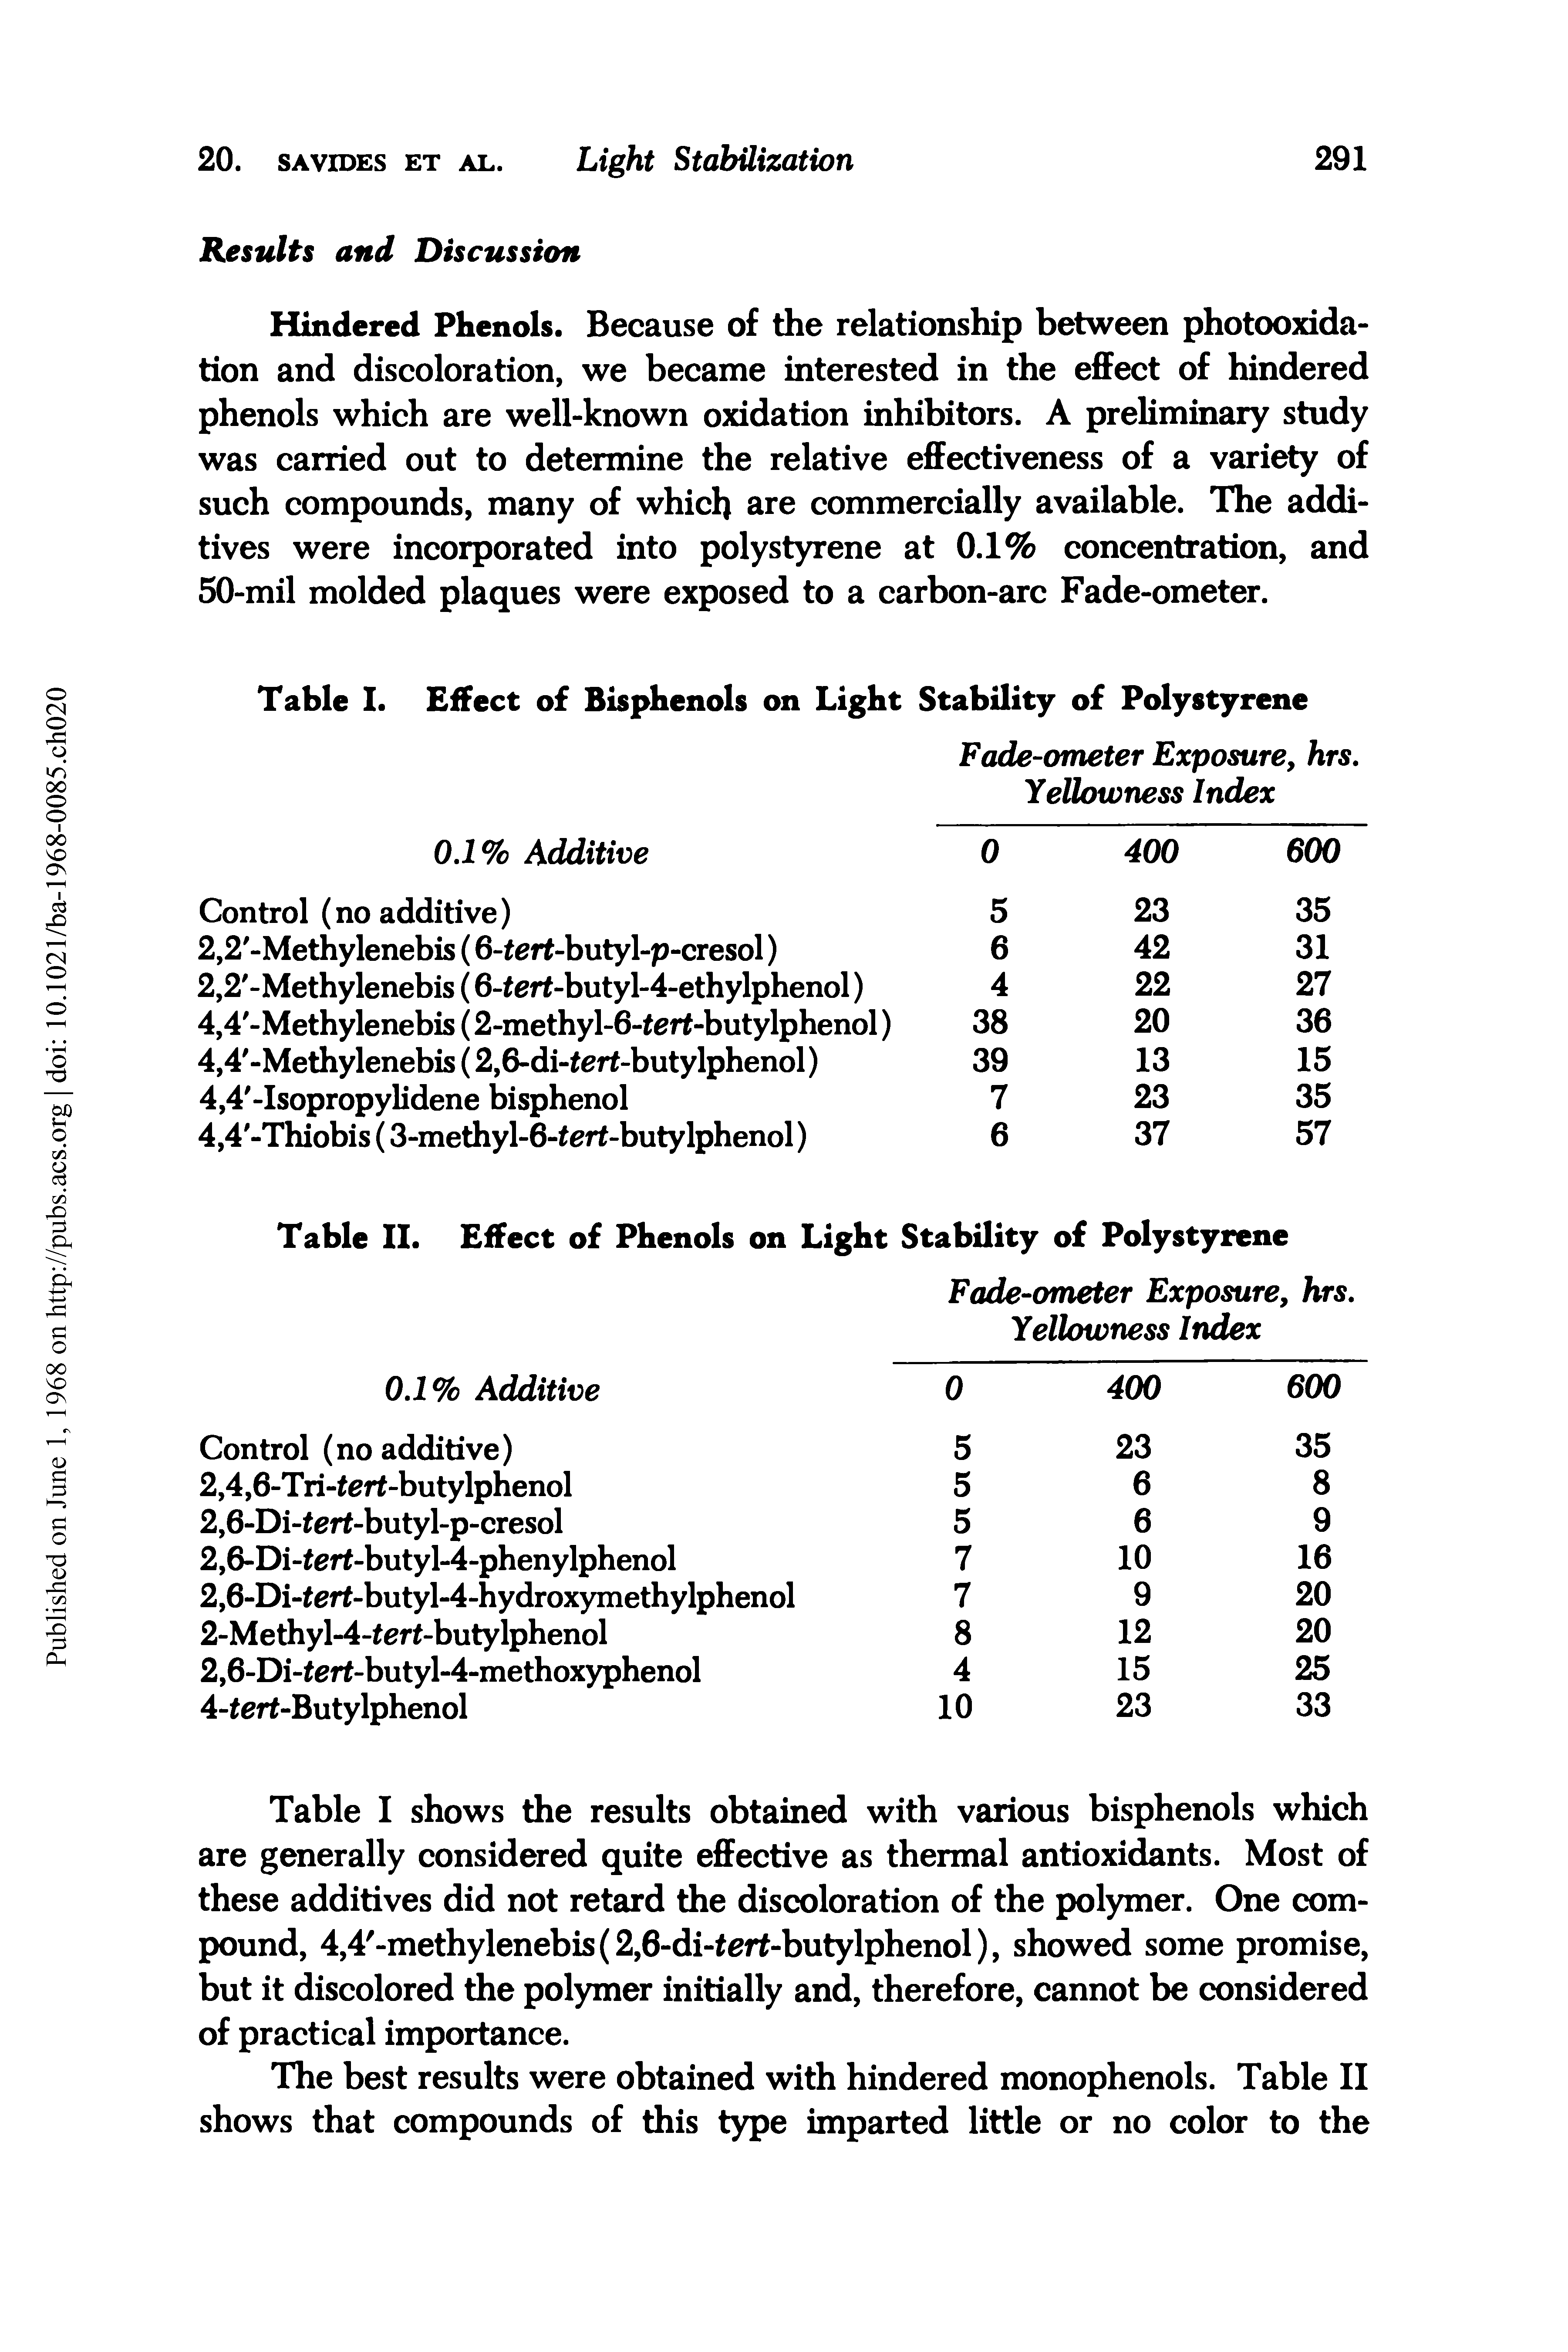 Table I shows the results obtained with various bisphenols which are generally considered quite effective as thermal antioxidants. Most of these additives did not retard the discoloration of the polymer. One compound, 4,4 -methylenebis(2,6-di-terf-butylphenol), showed some promise, but it discolored the polymer initially and, therefore, cannot be considered of practical importance.